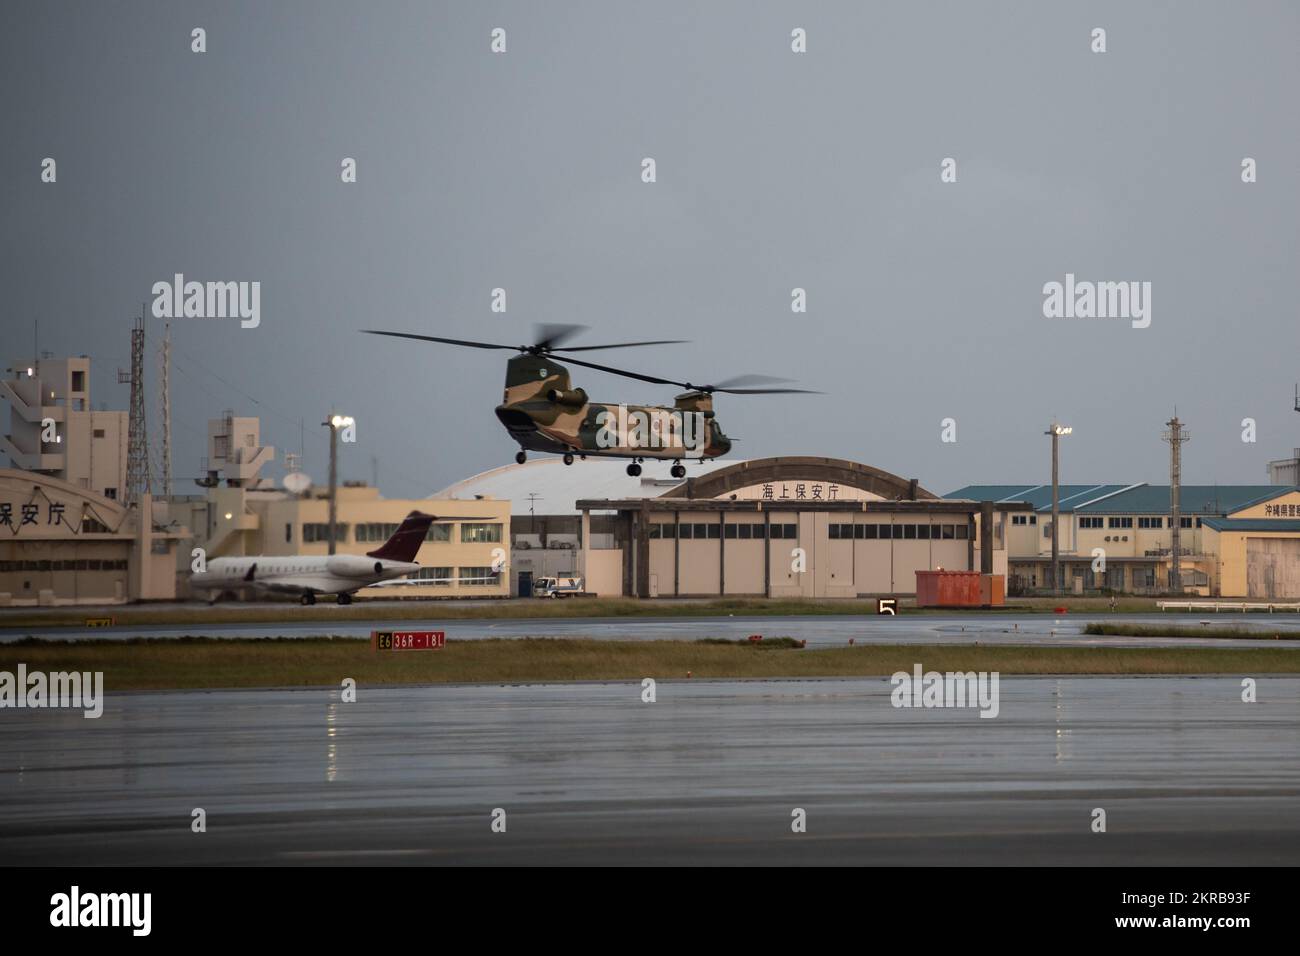 U.S. Marines with 12th Marines, 3d Marine Division, take off in a Japan Self-Defense Force CH-47JA helicopter in support of Keen Sword 23, on Okinawa, Japan, Nov 11, 2022. U.S. Marines flew to Yonaguni, Japan to participate in Bilateral Ground Tactical Coordination Center operations in support of Keen Sword 23. Keen Sword is a biennial training event that exercises the combined capabilities and lethality developed between 3d Marine Division, III Marine Expeditionary Force, and the Japan Self-Defense Force. This bilateral field-training exercise between the U.S. military and JSDF strengthens in Stock Photo